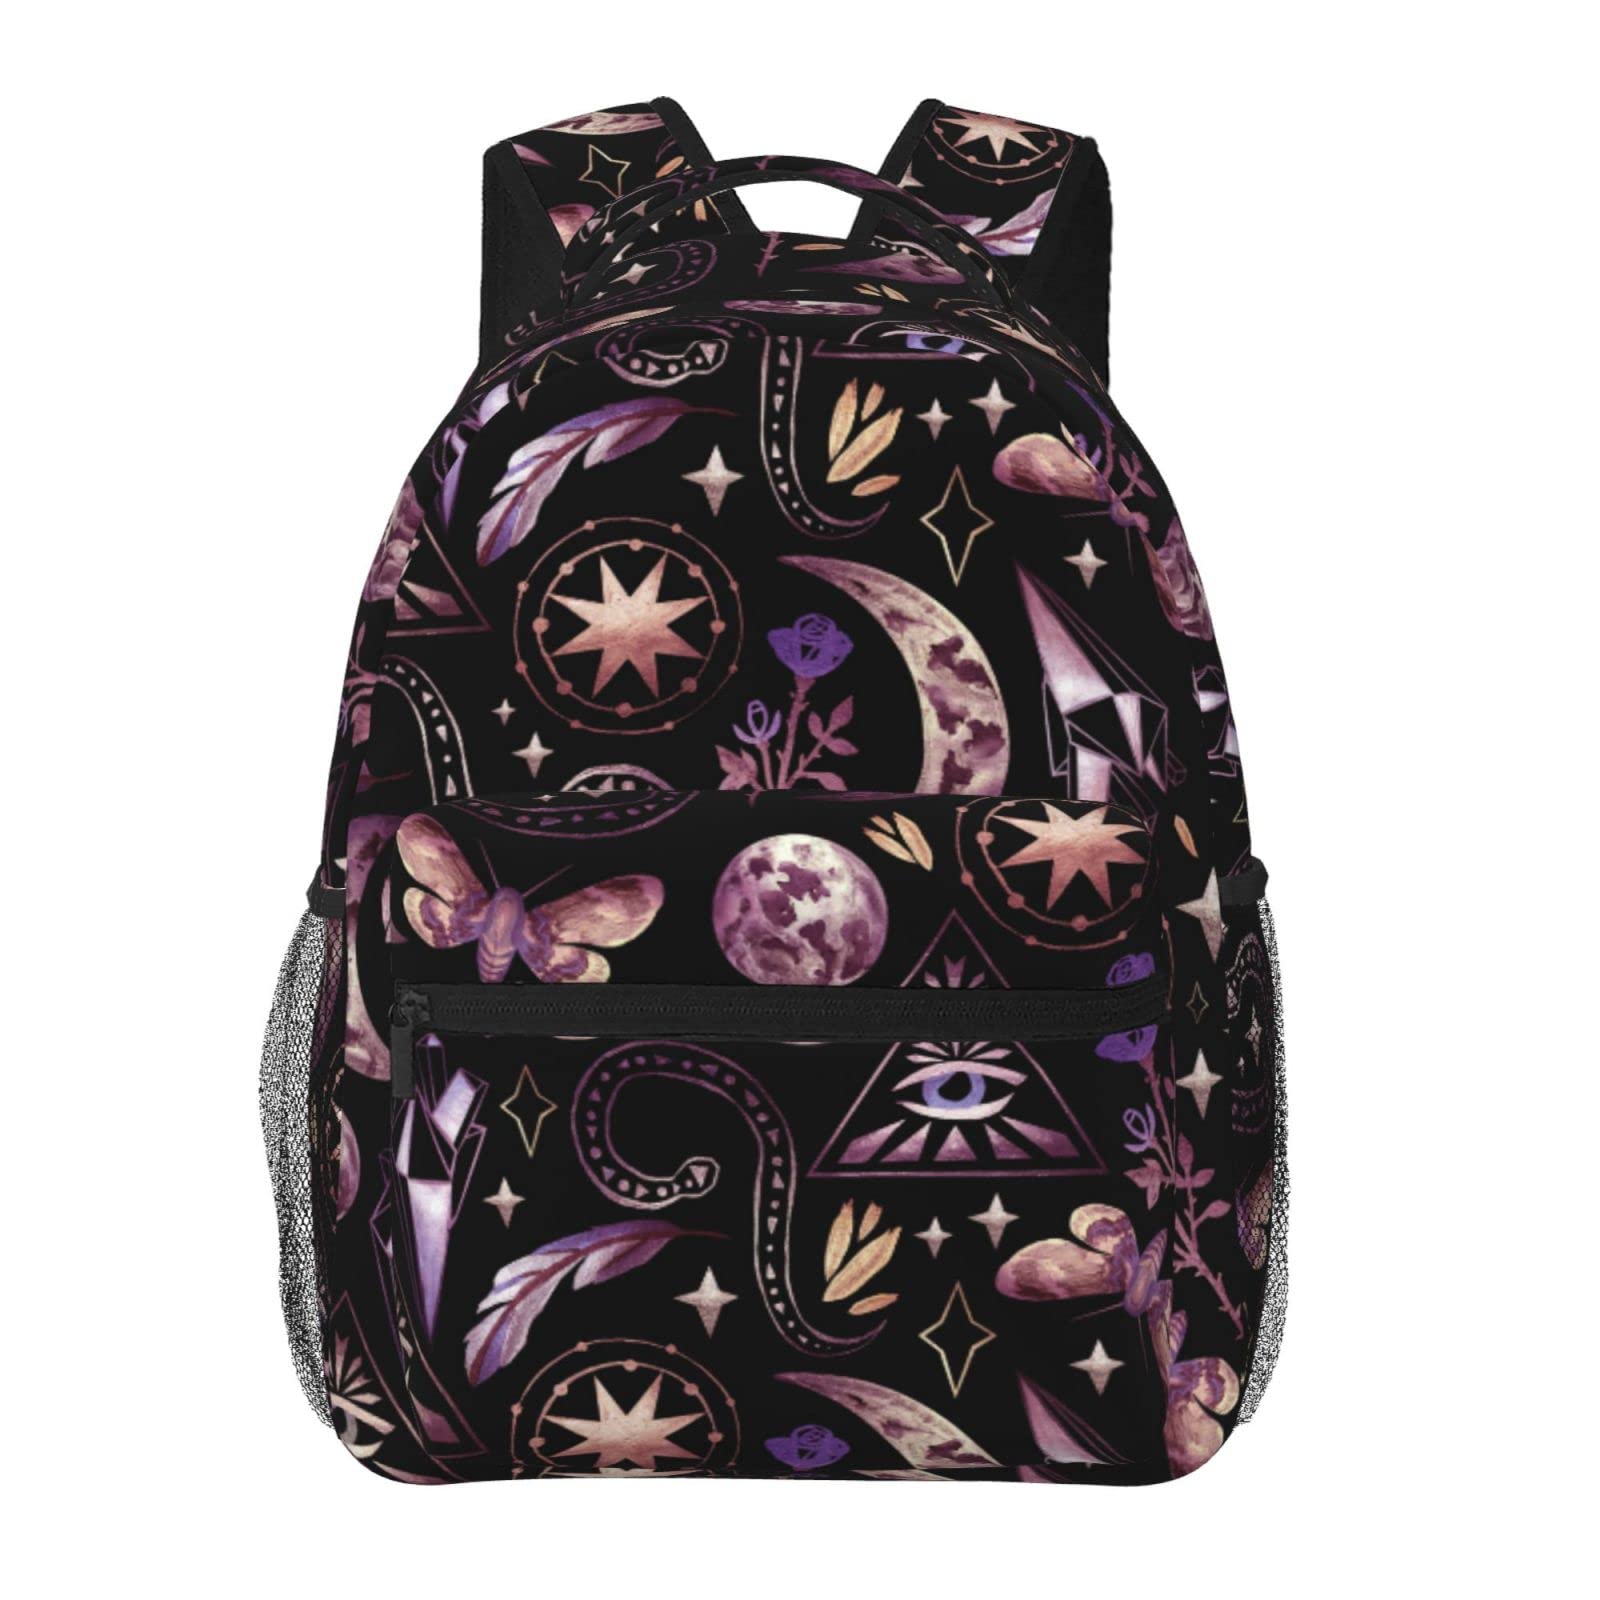 DADABULIU School Backpack Tarot Moon Butterfly Magic Goth for Women Girl Student Bookbag Durable Casual Daypack Teens College Lightweight Hiking Travel Bag Over 3 Years Old